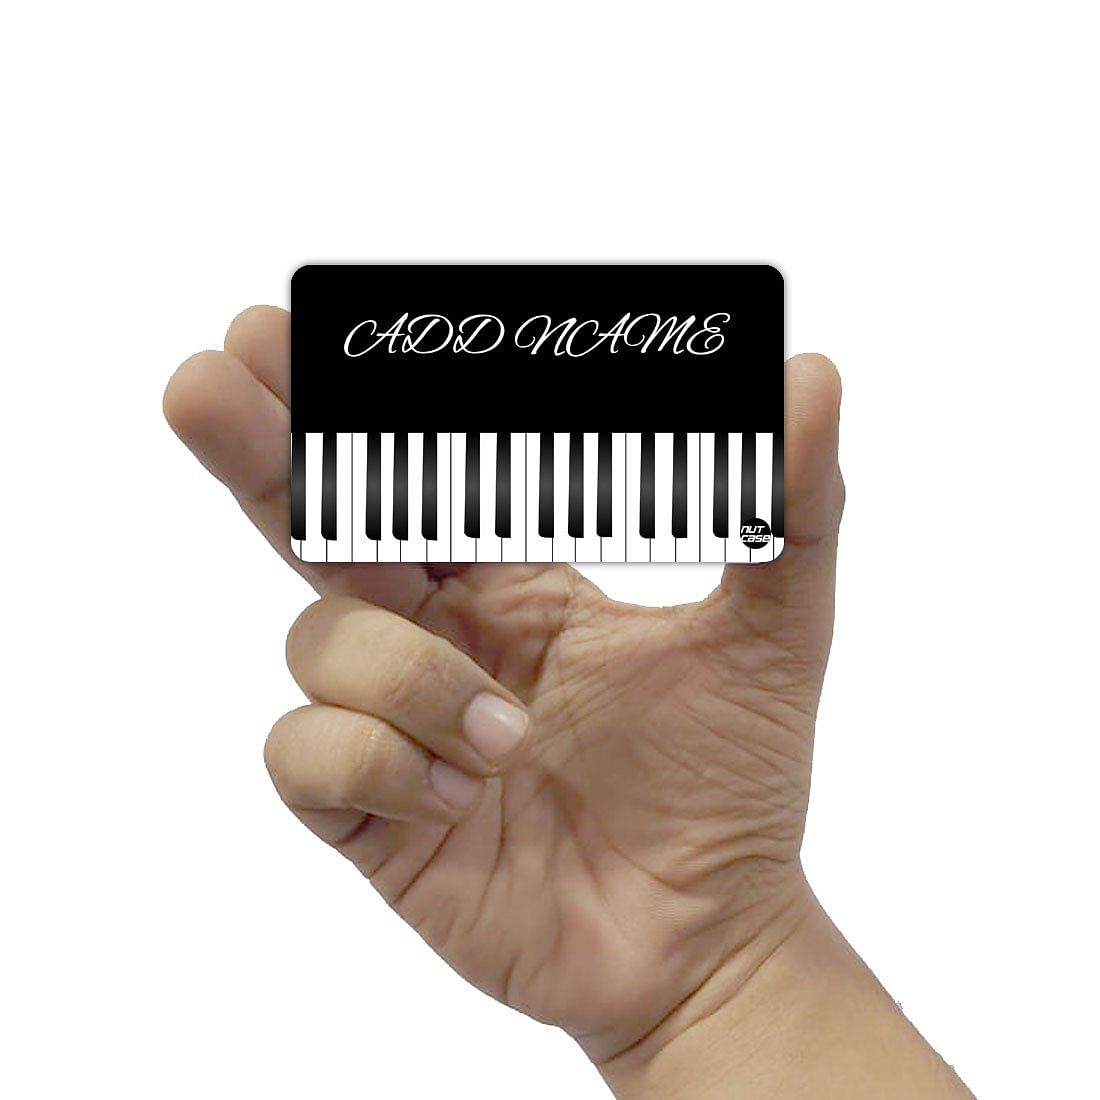 Best Customised NFC Enabled Business Cards - Piano Nutcase